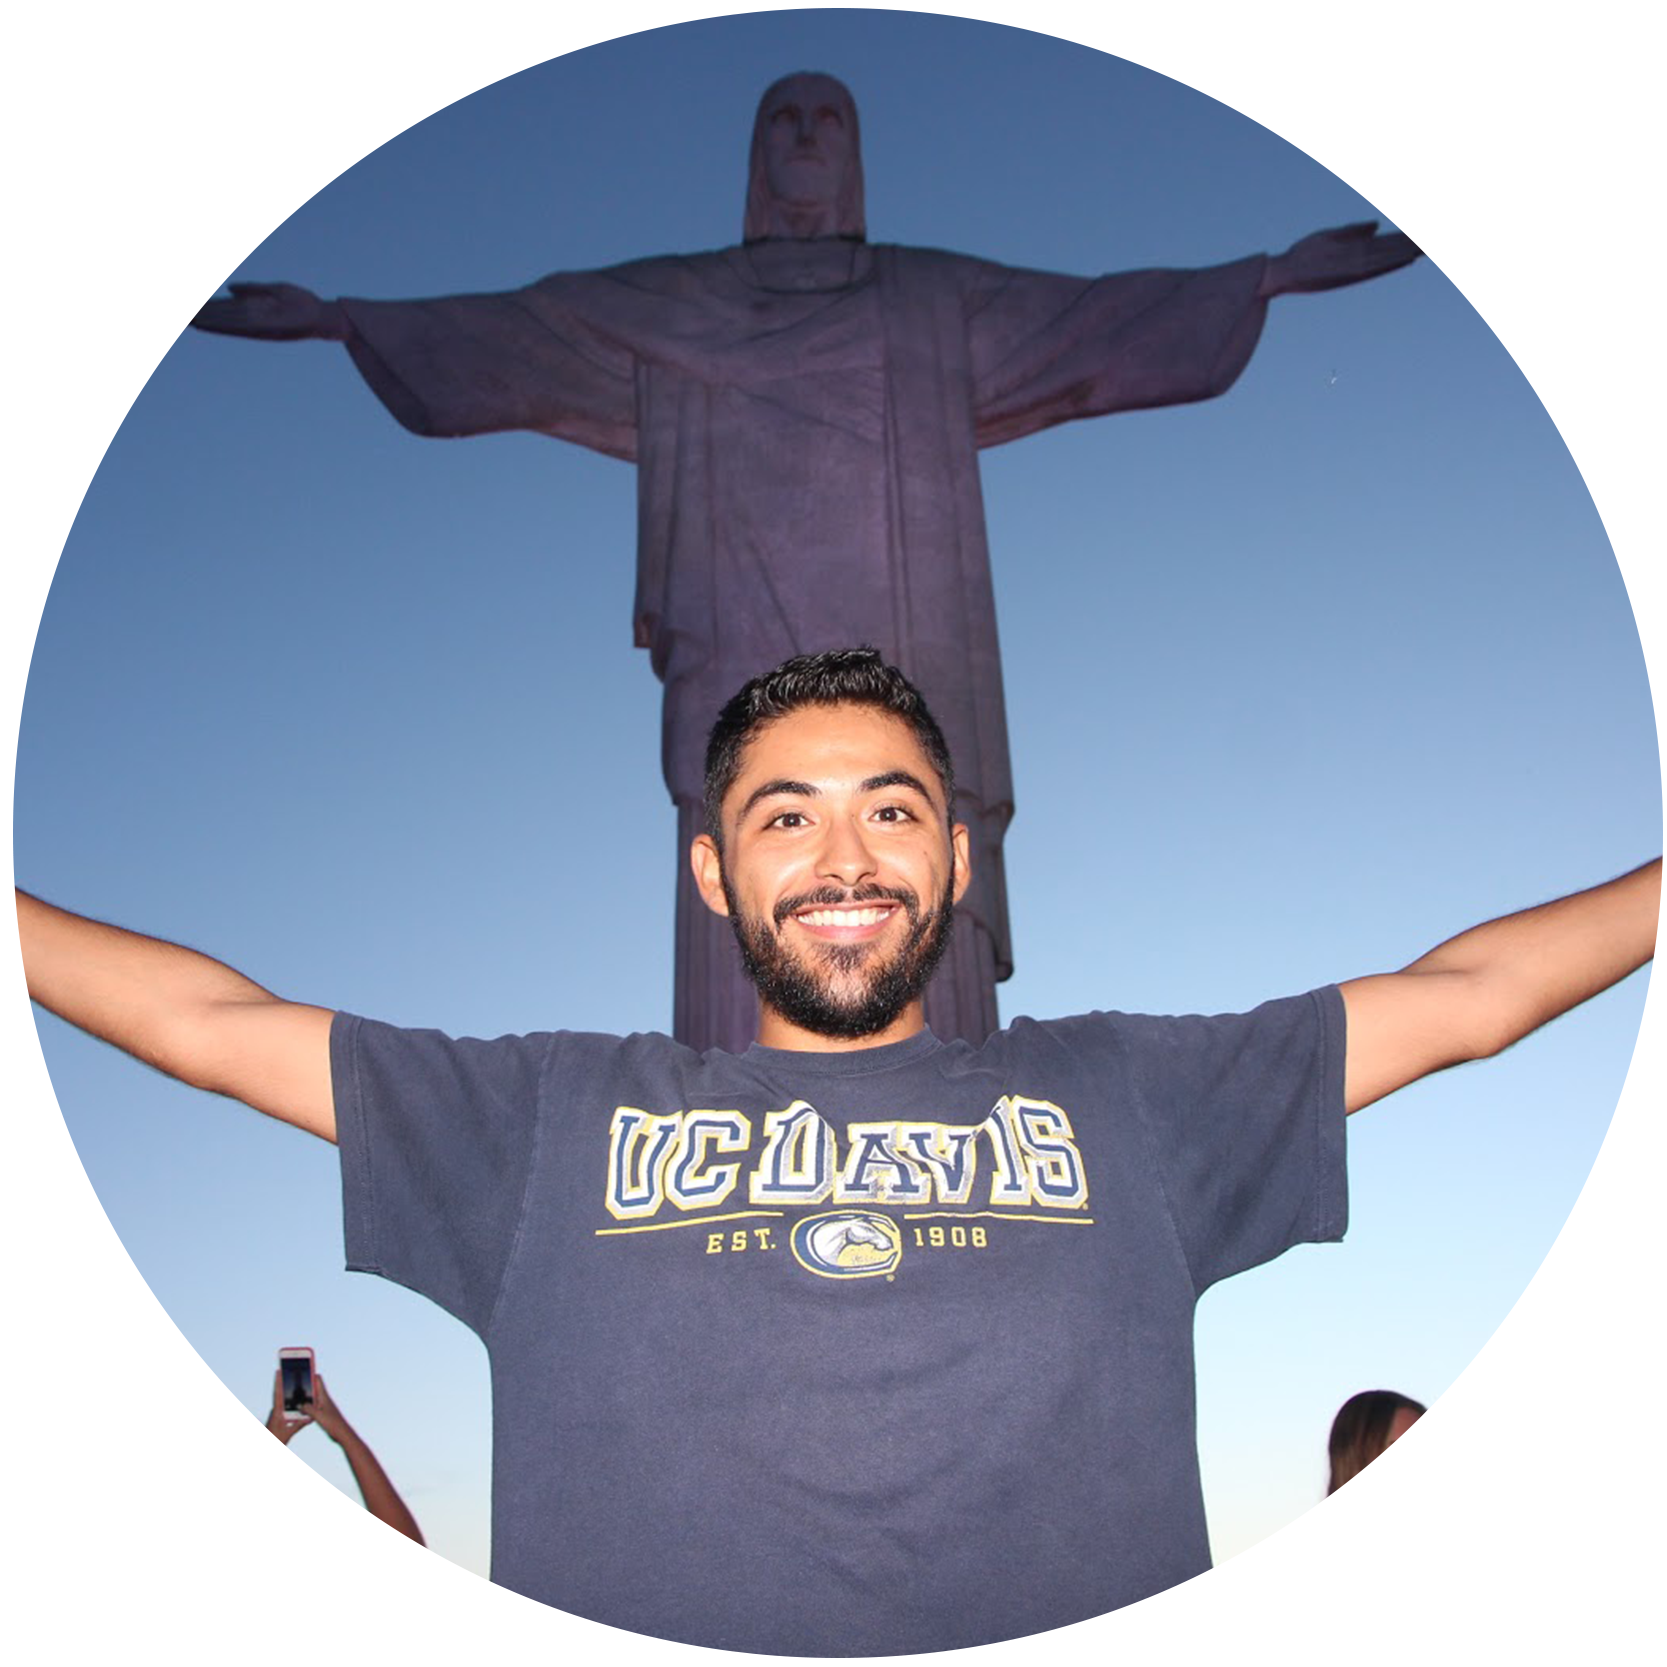 Ricardo Martinez poses in front of the Christ the Redeemer statue